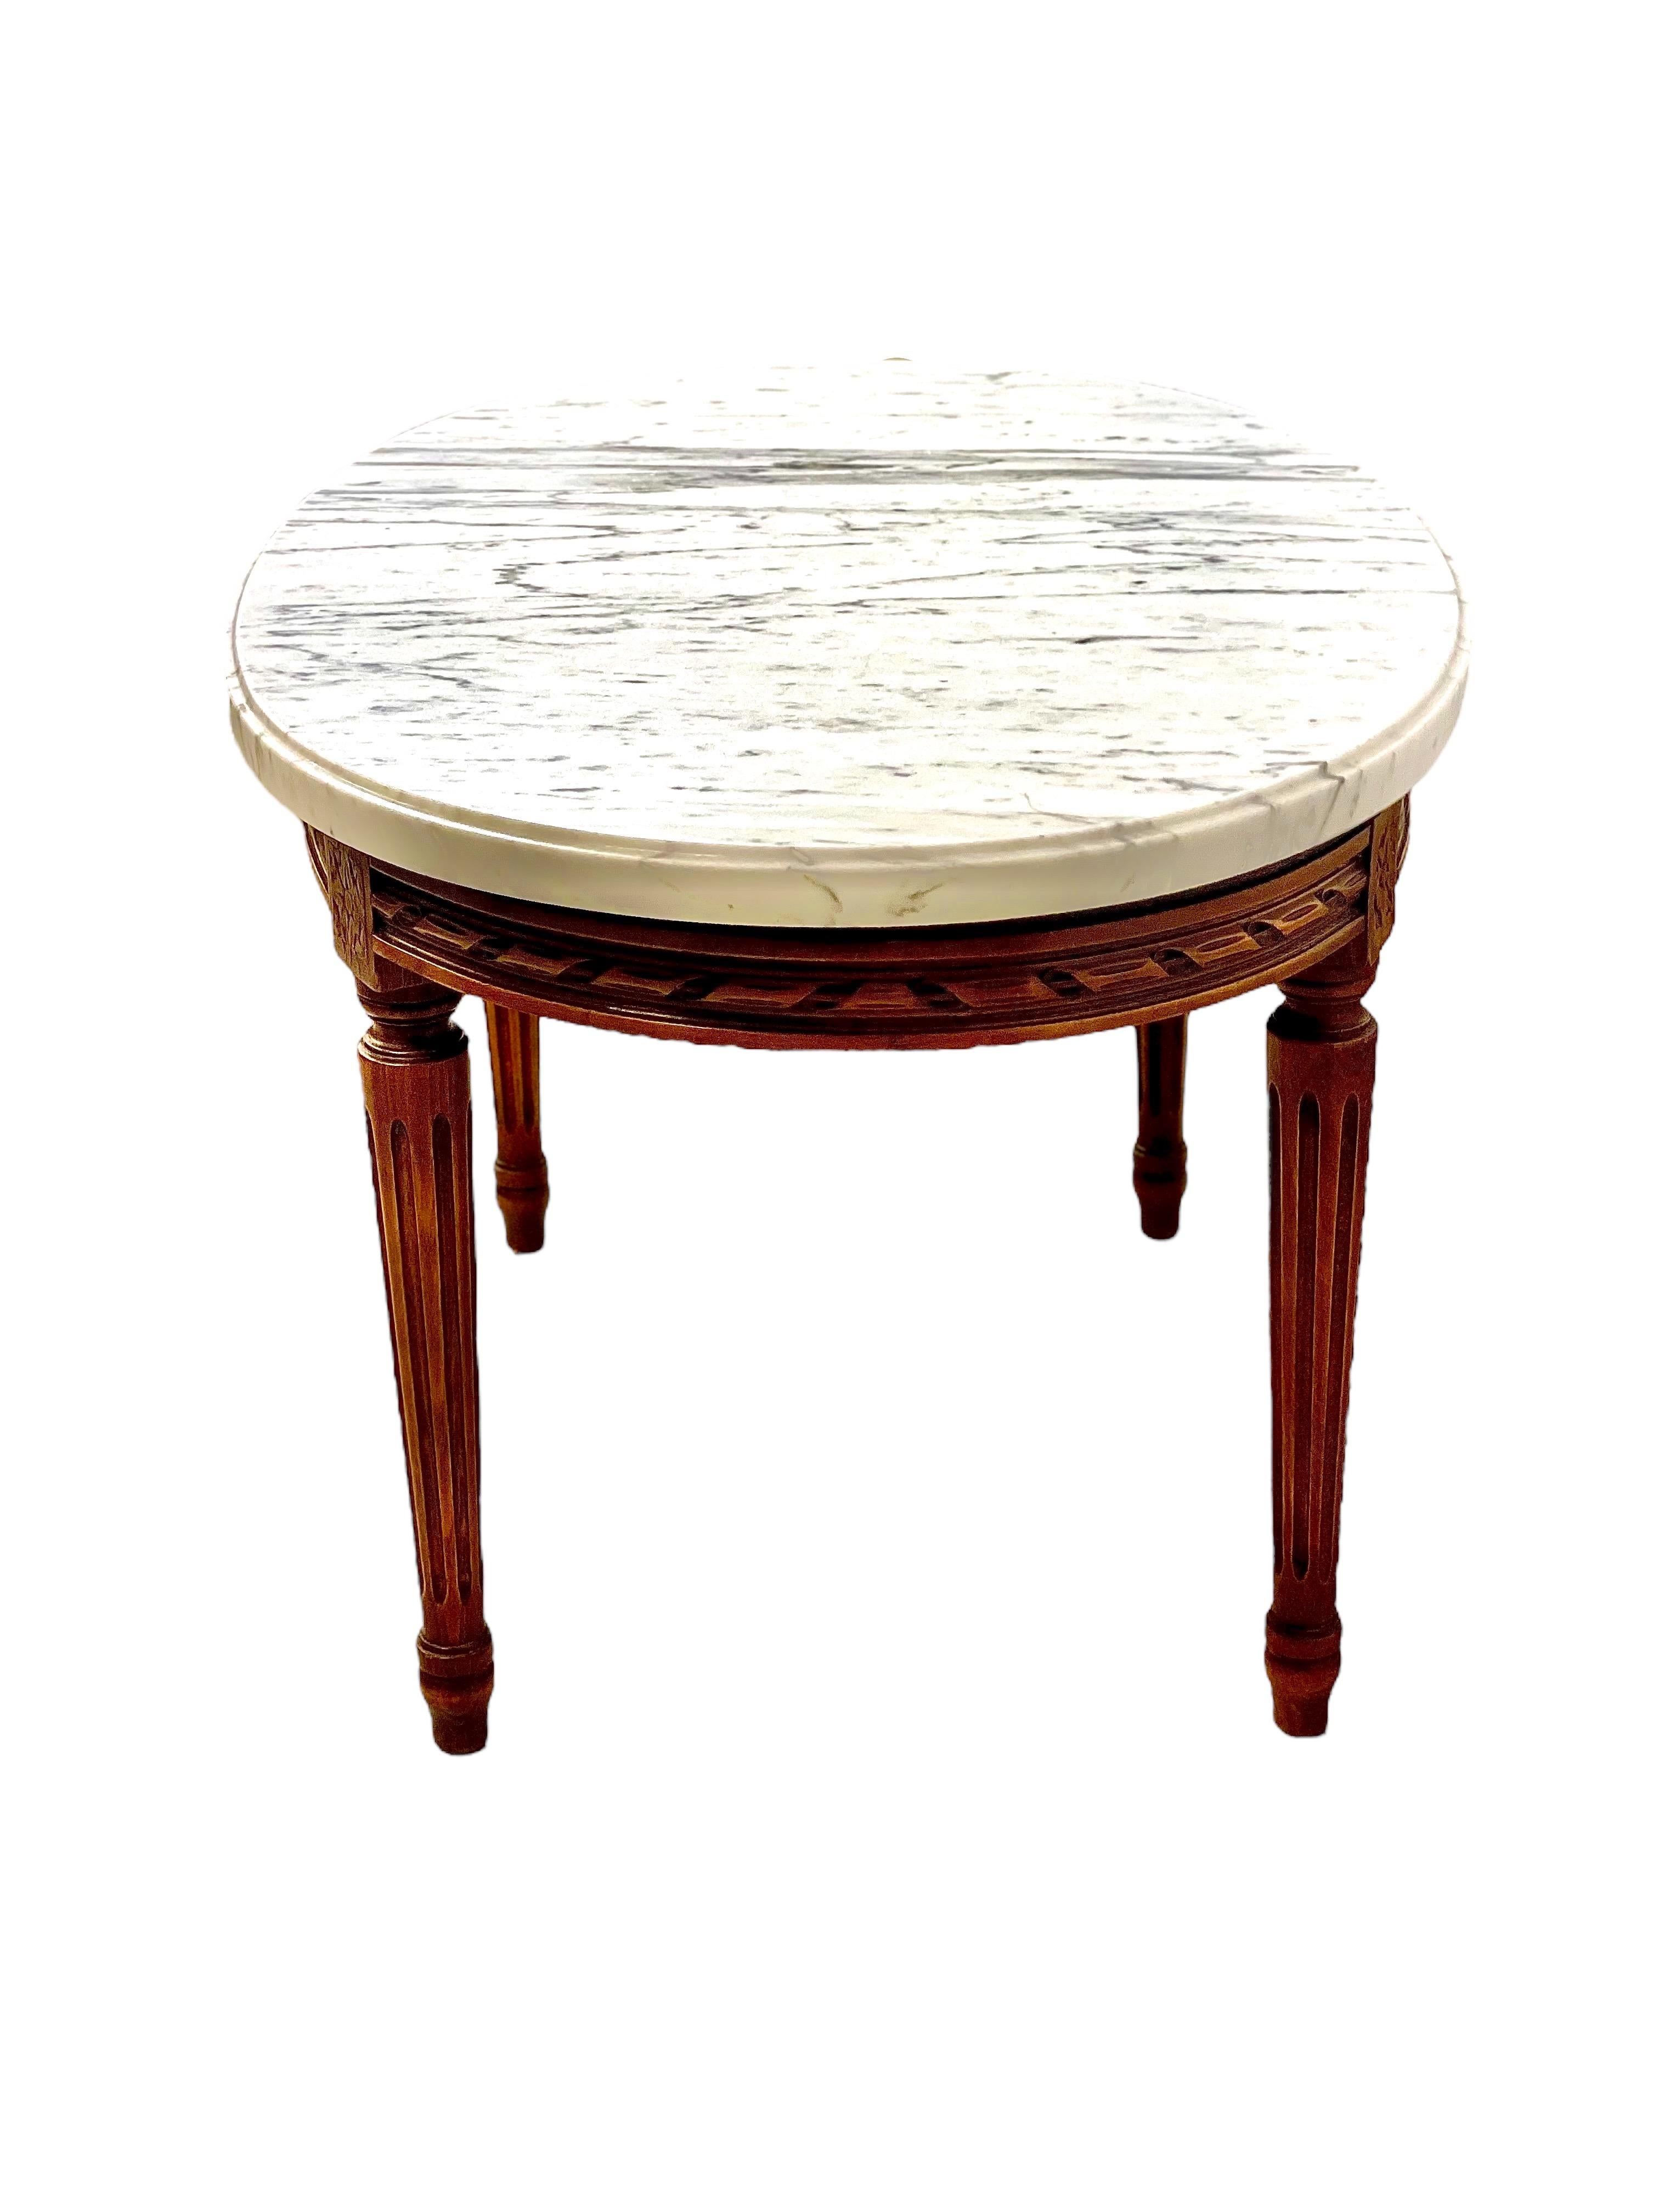 French Louis XVI Style Marble Topped Oval Coffee Table For Sale